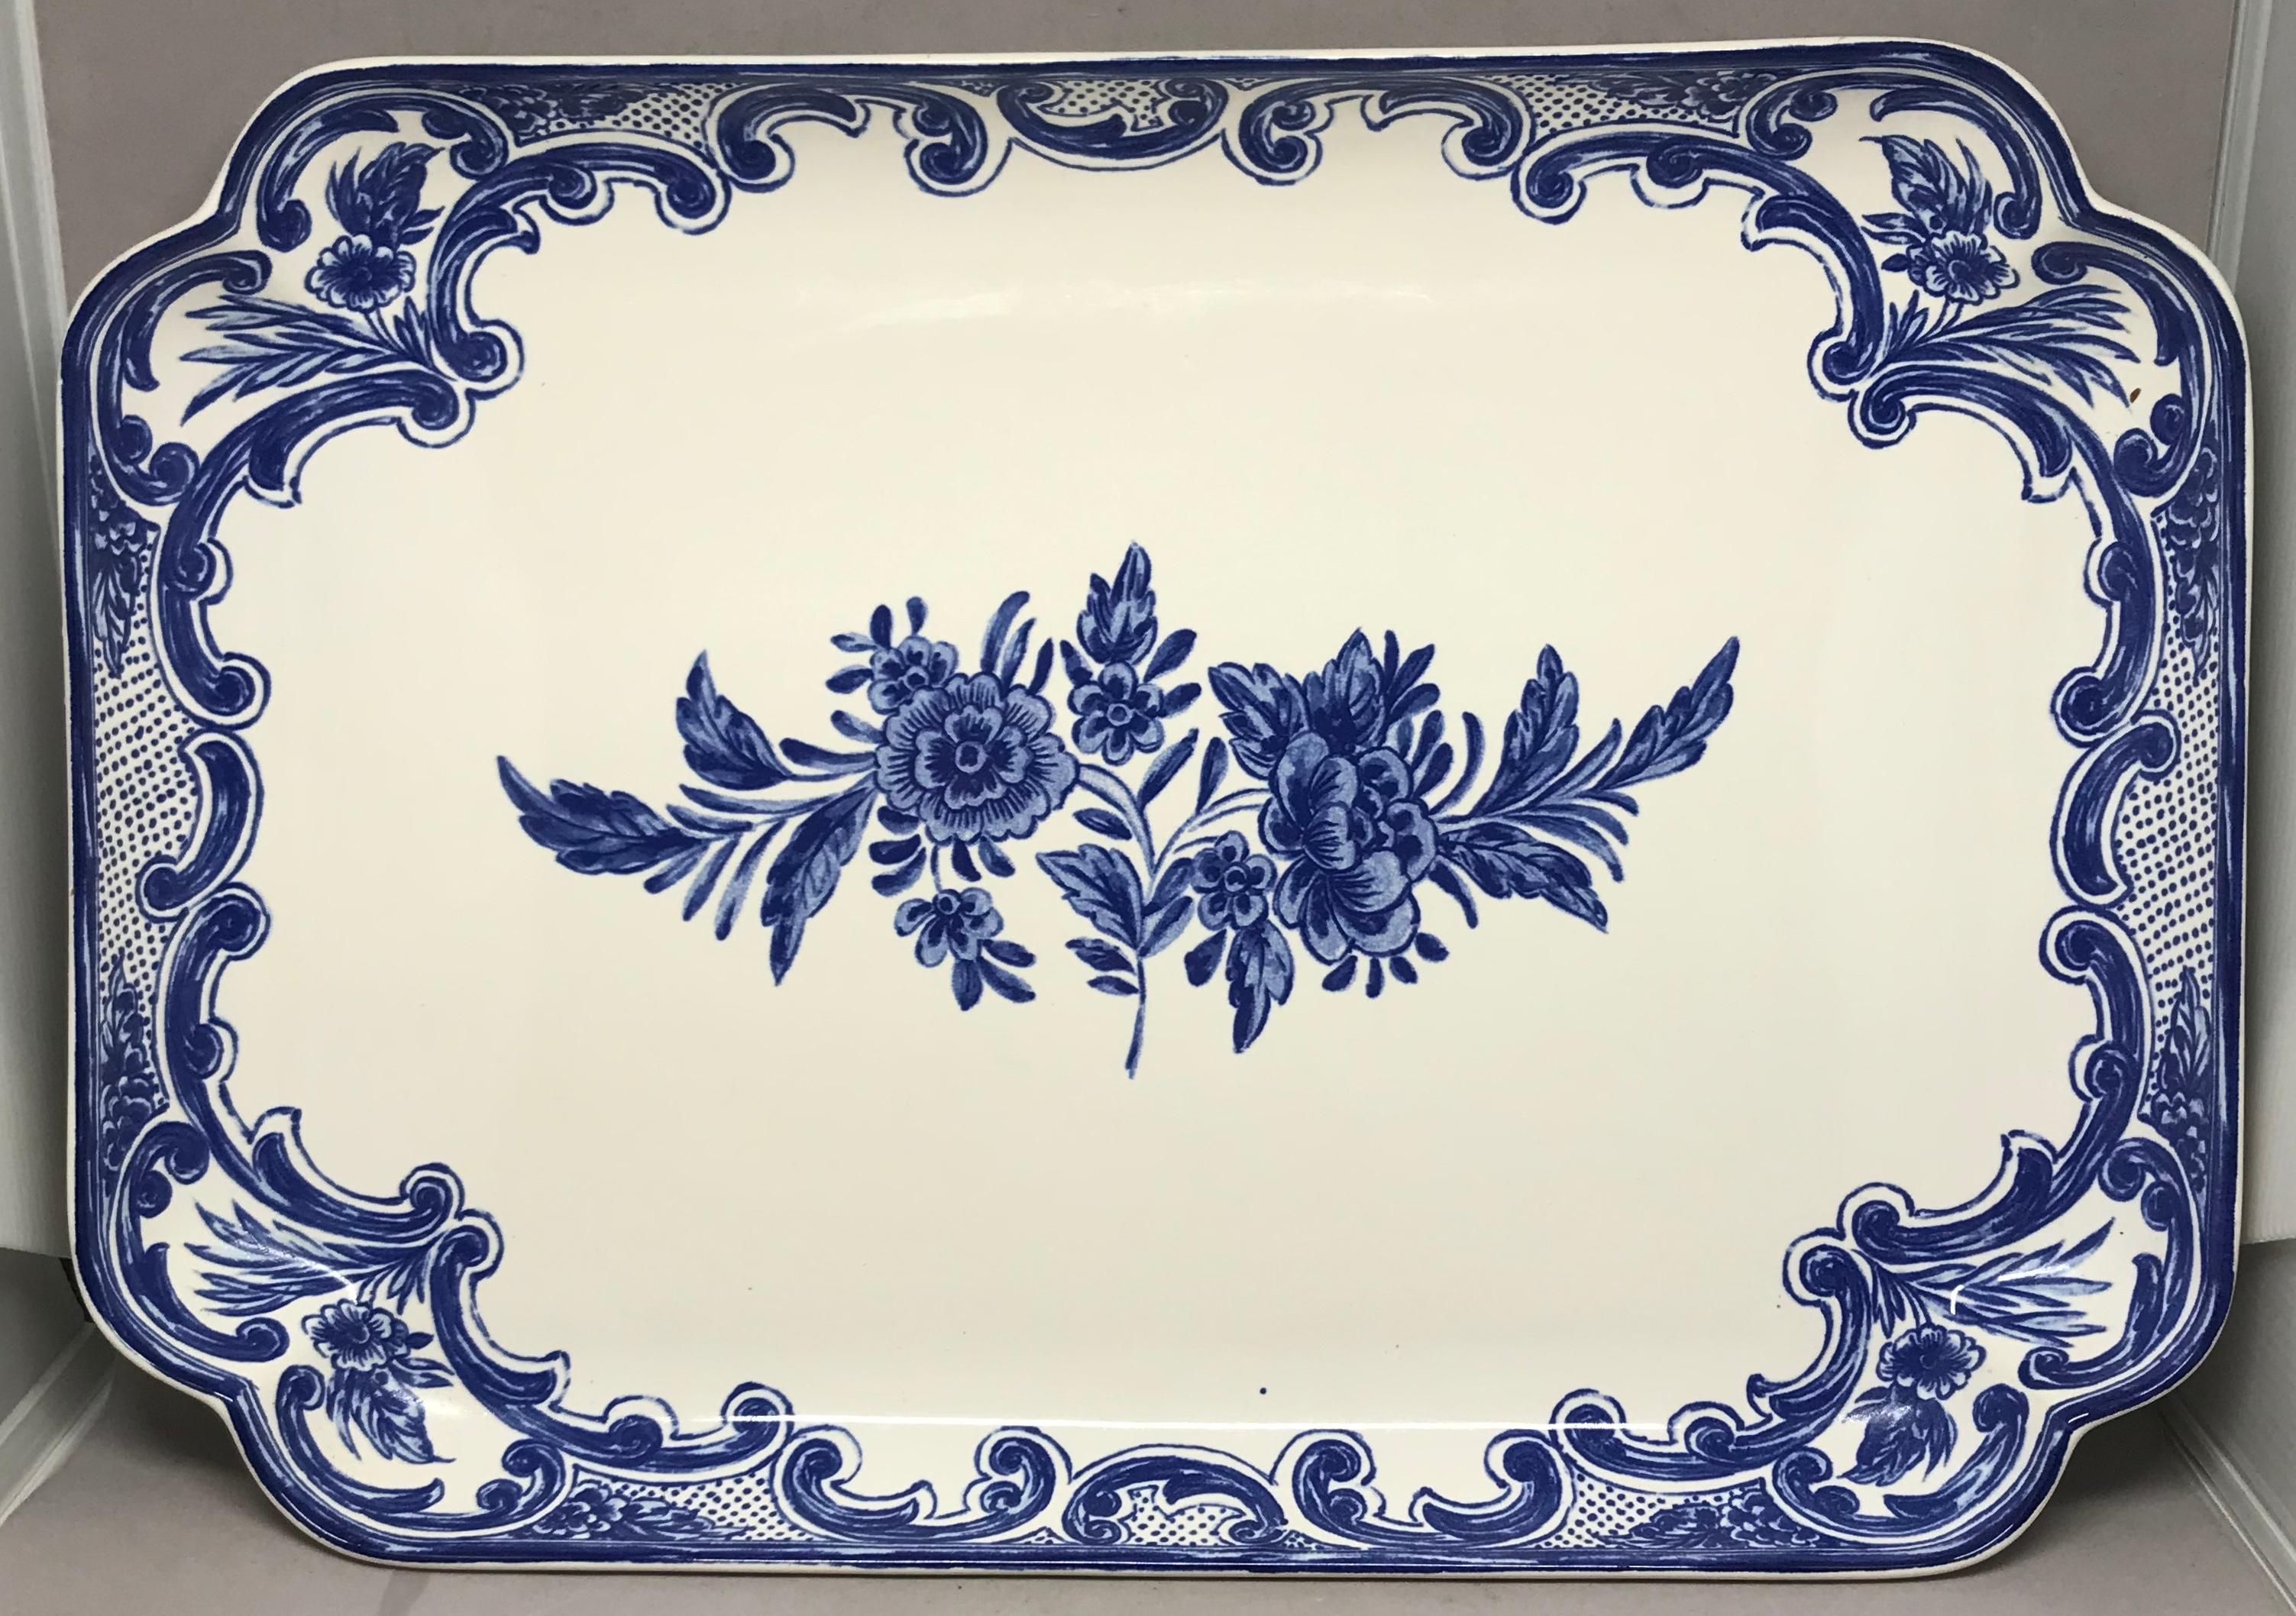 Blue and white Delft Tiffany & Co. platter. Large shaped rimmed platter with floral reserve border centering a larger floral spray. Markings for Tiffany & Co. Portugal, 1994
Dimensions: 14.25” L x 10” W x 1.5” H.